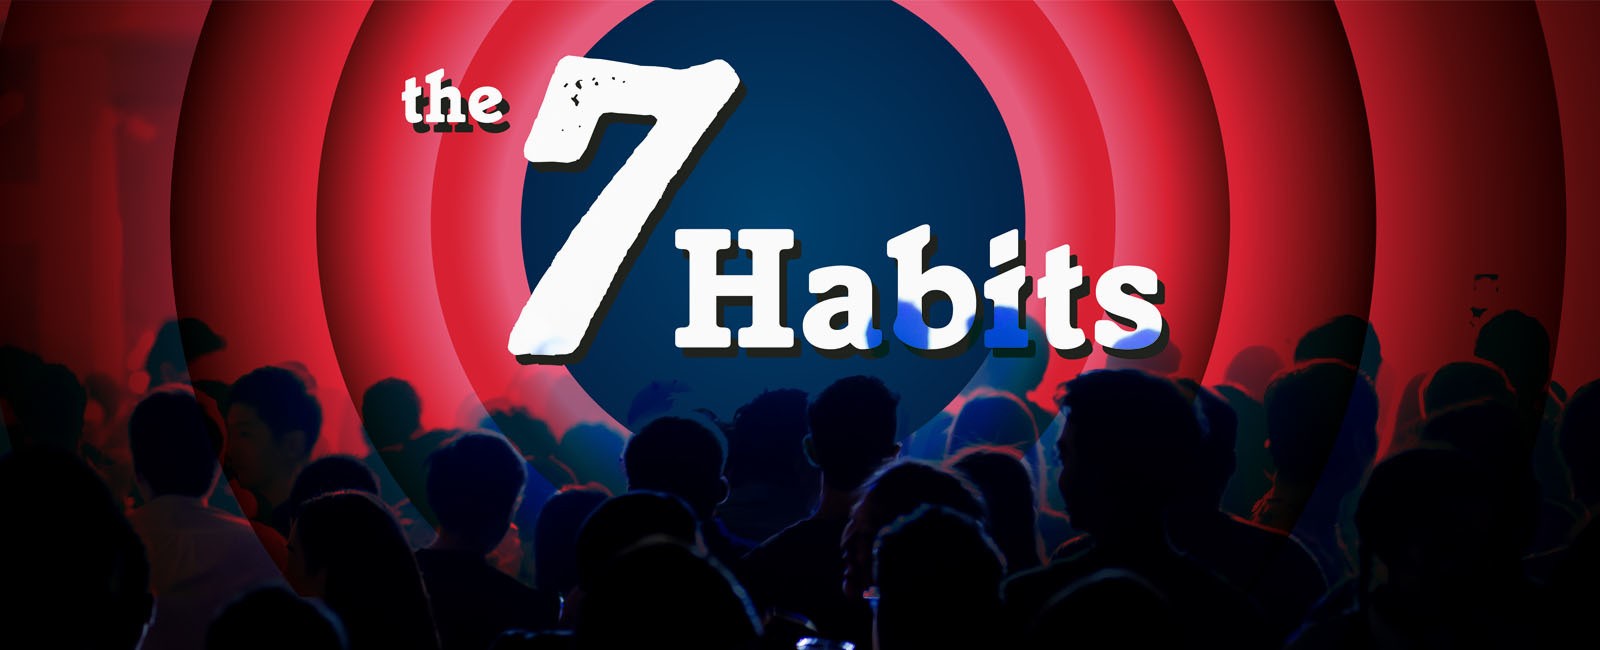 The 7 Habits Skiers: Be Pro-Active